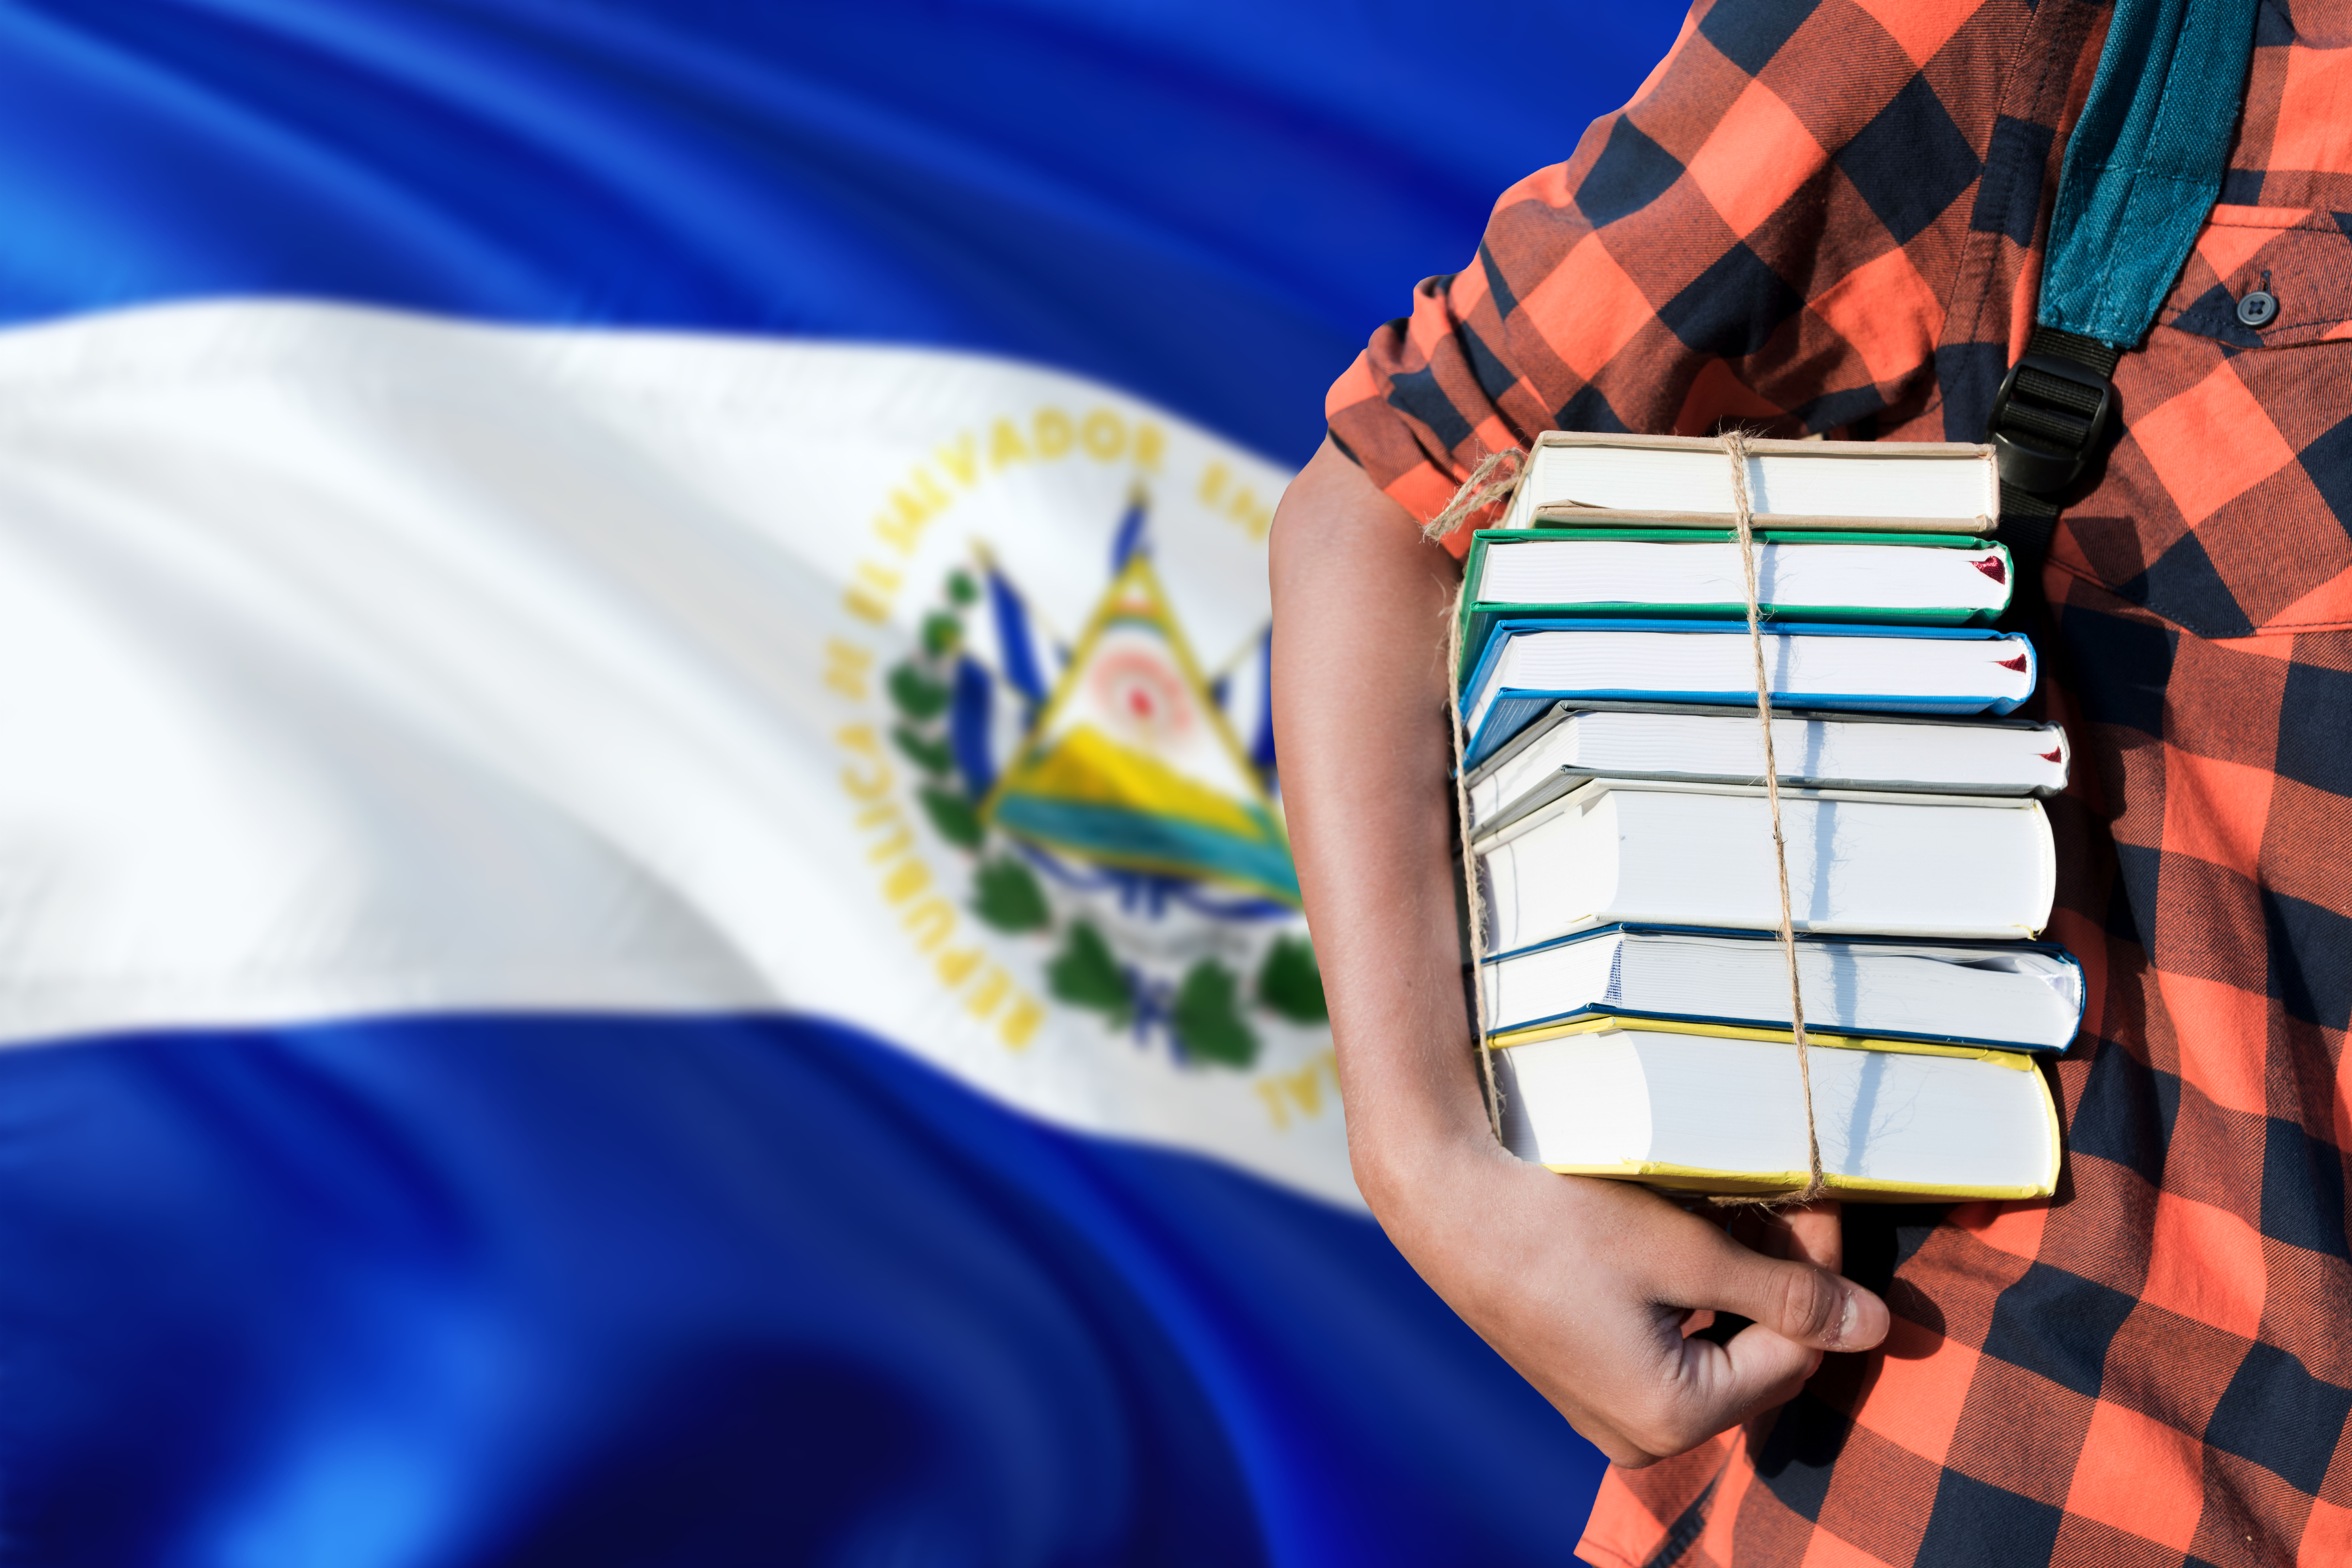 A student holds a pile of books under their arm against the background of the El Salvador flag.